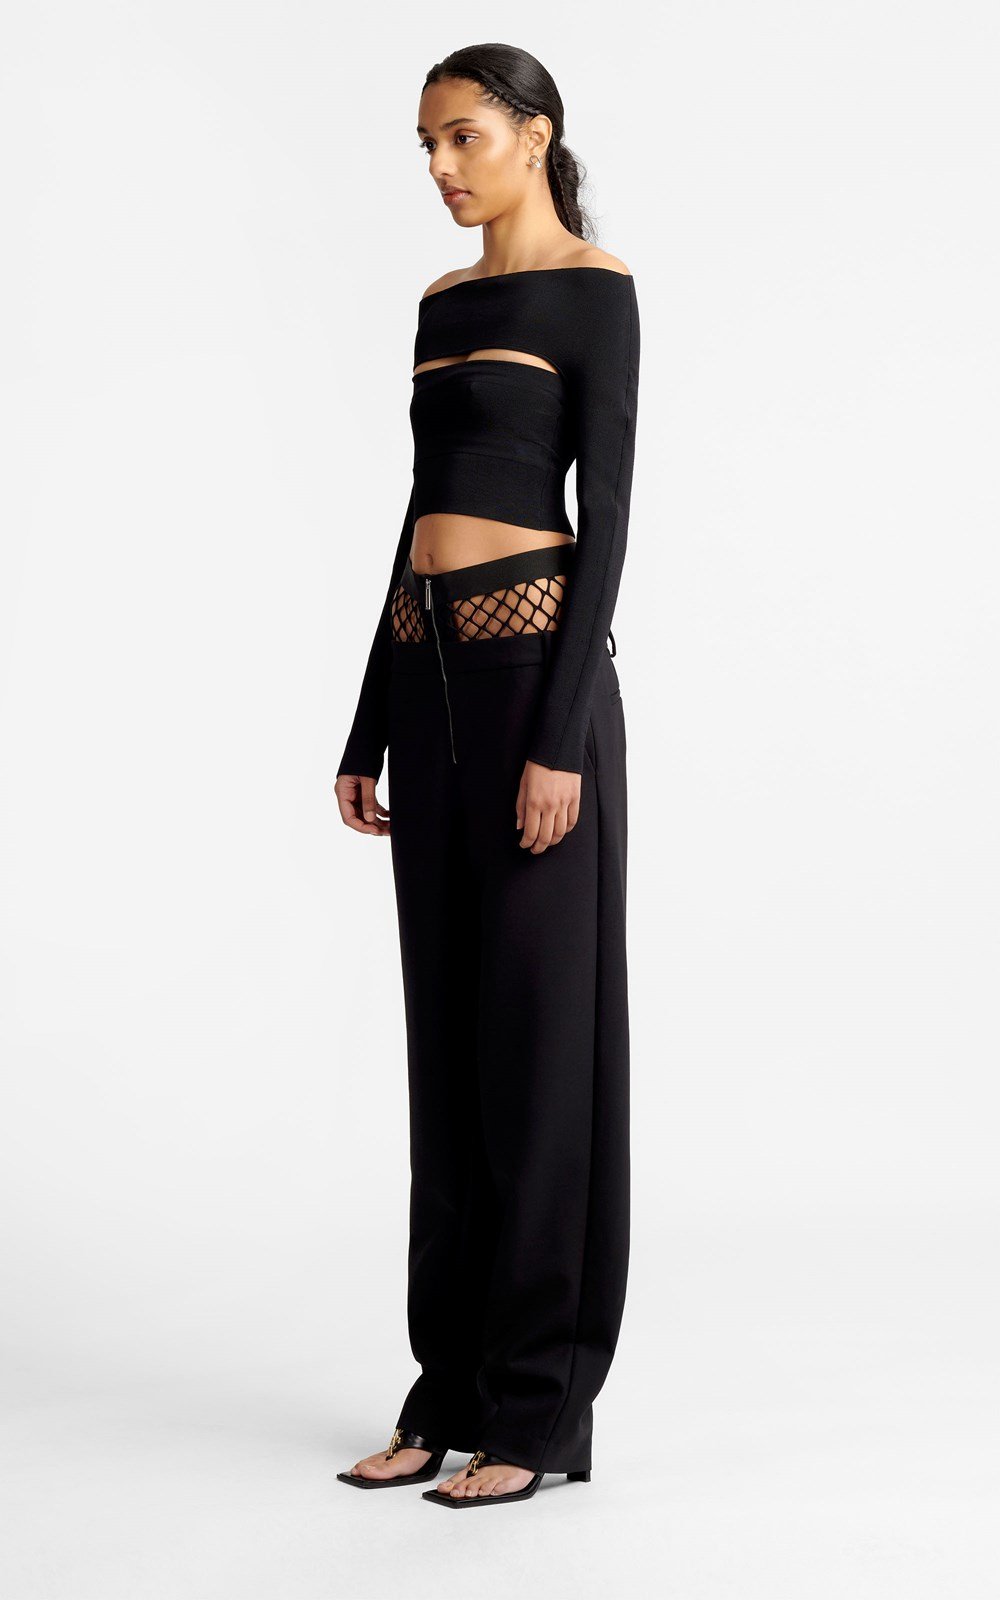 Two Piece Tube Top Black